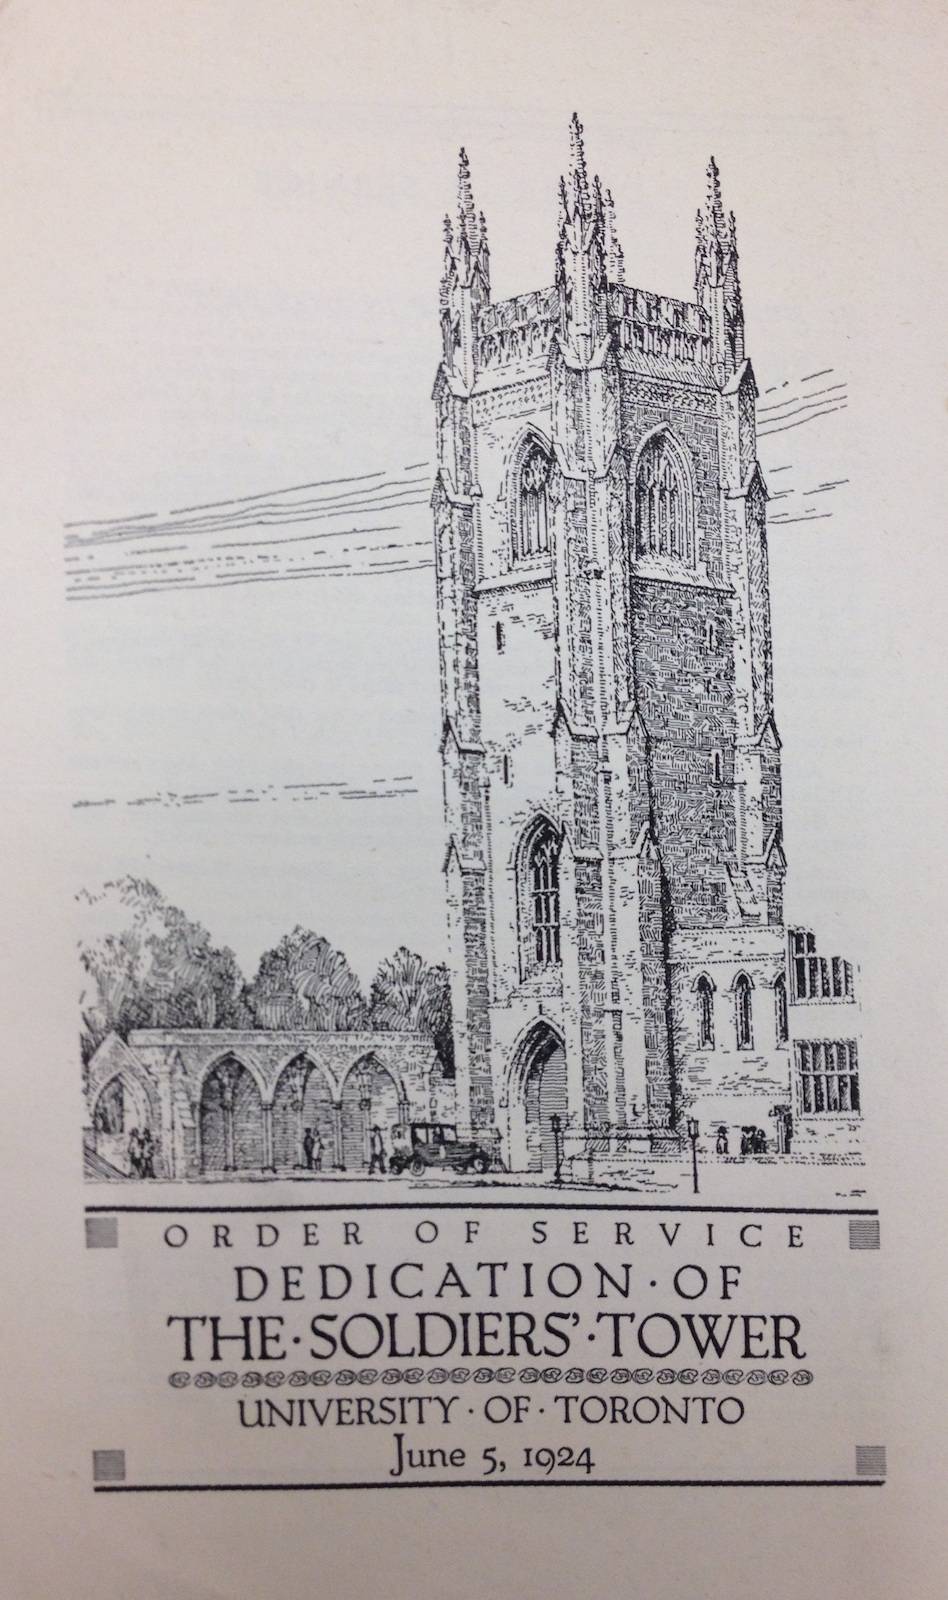 Front cover of "Order of Service, Dedication of the Soldiers' Tower", with a drawing of Solders' Tower